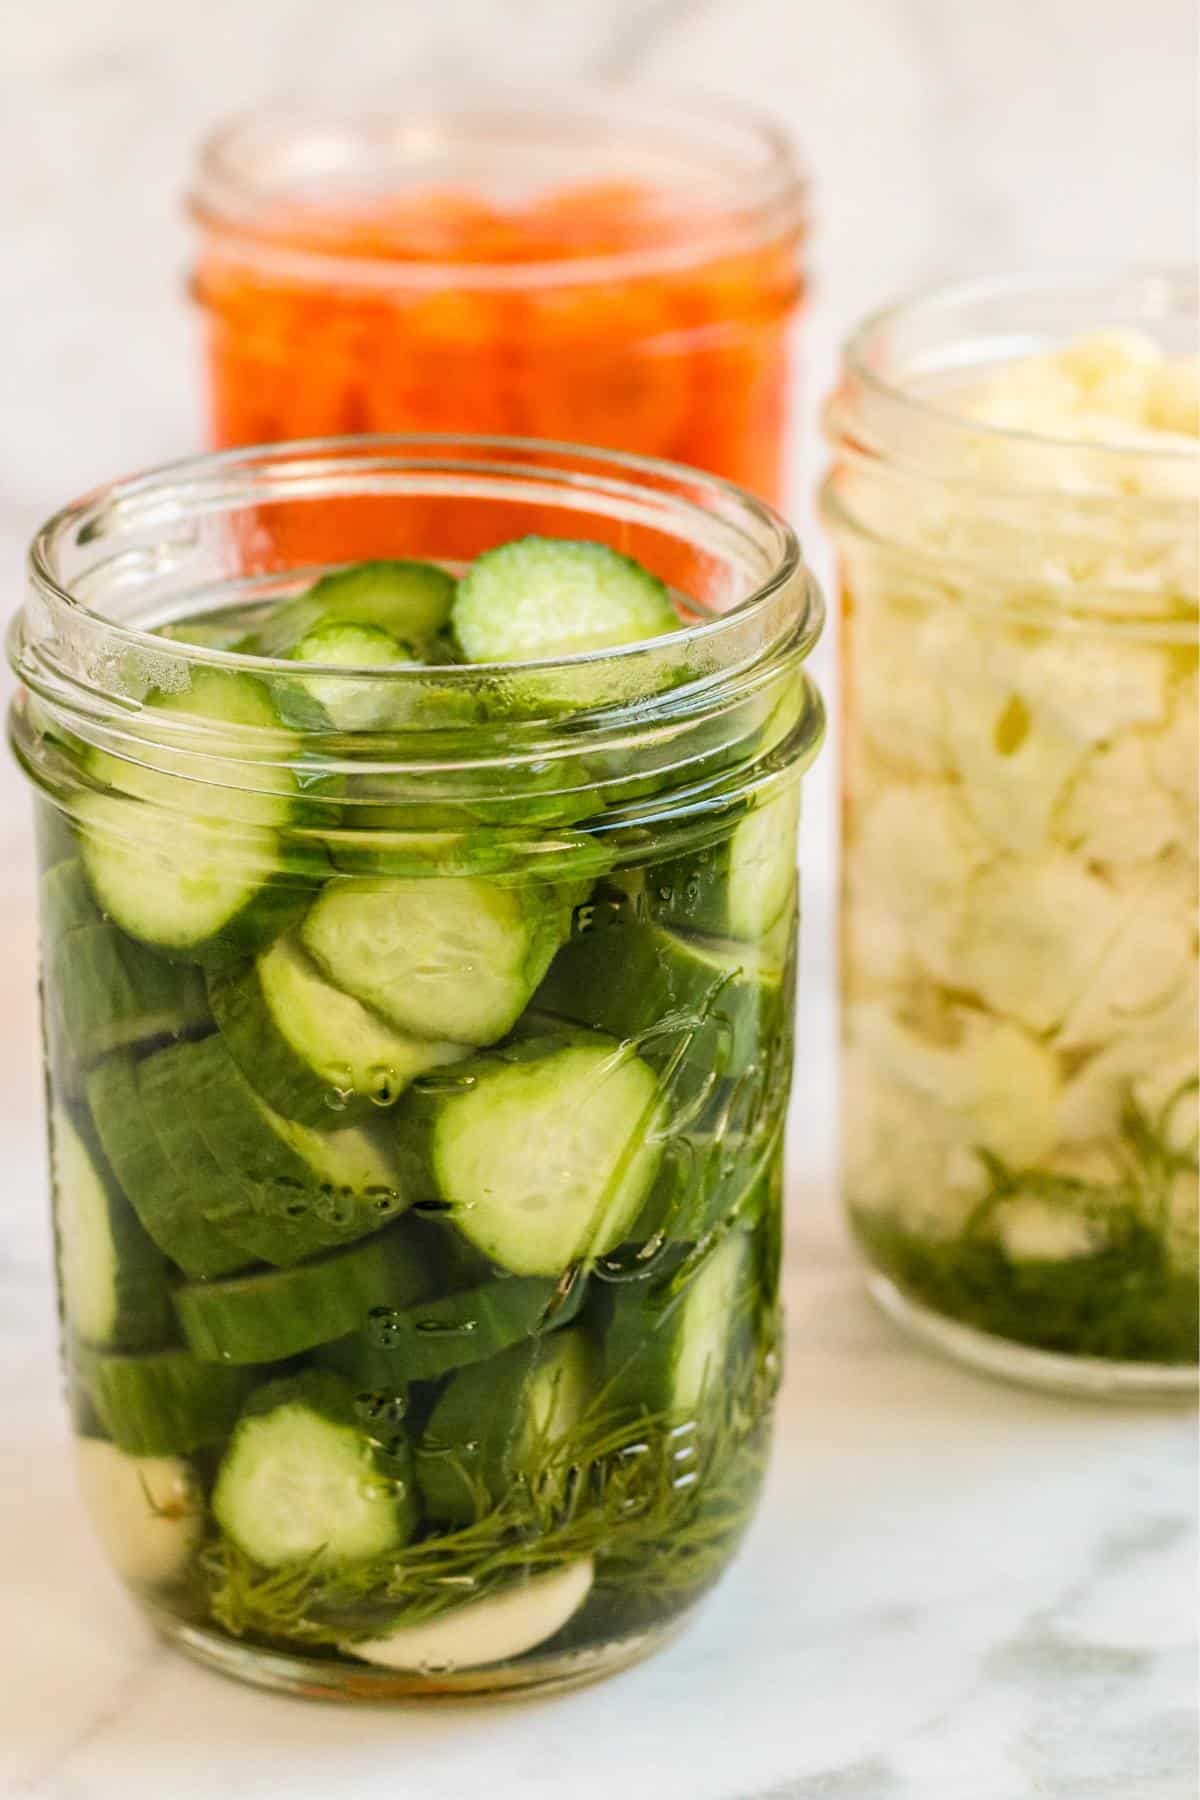 Jars of pickled cucumbers, carrots, and cauliflower.